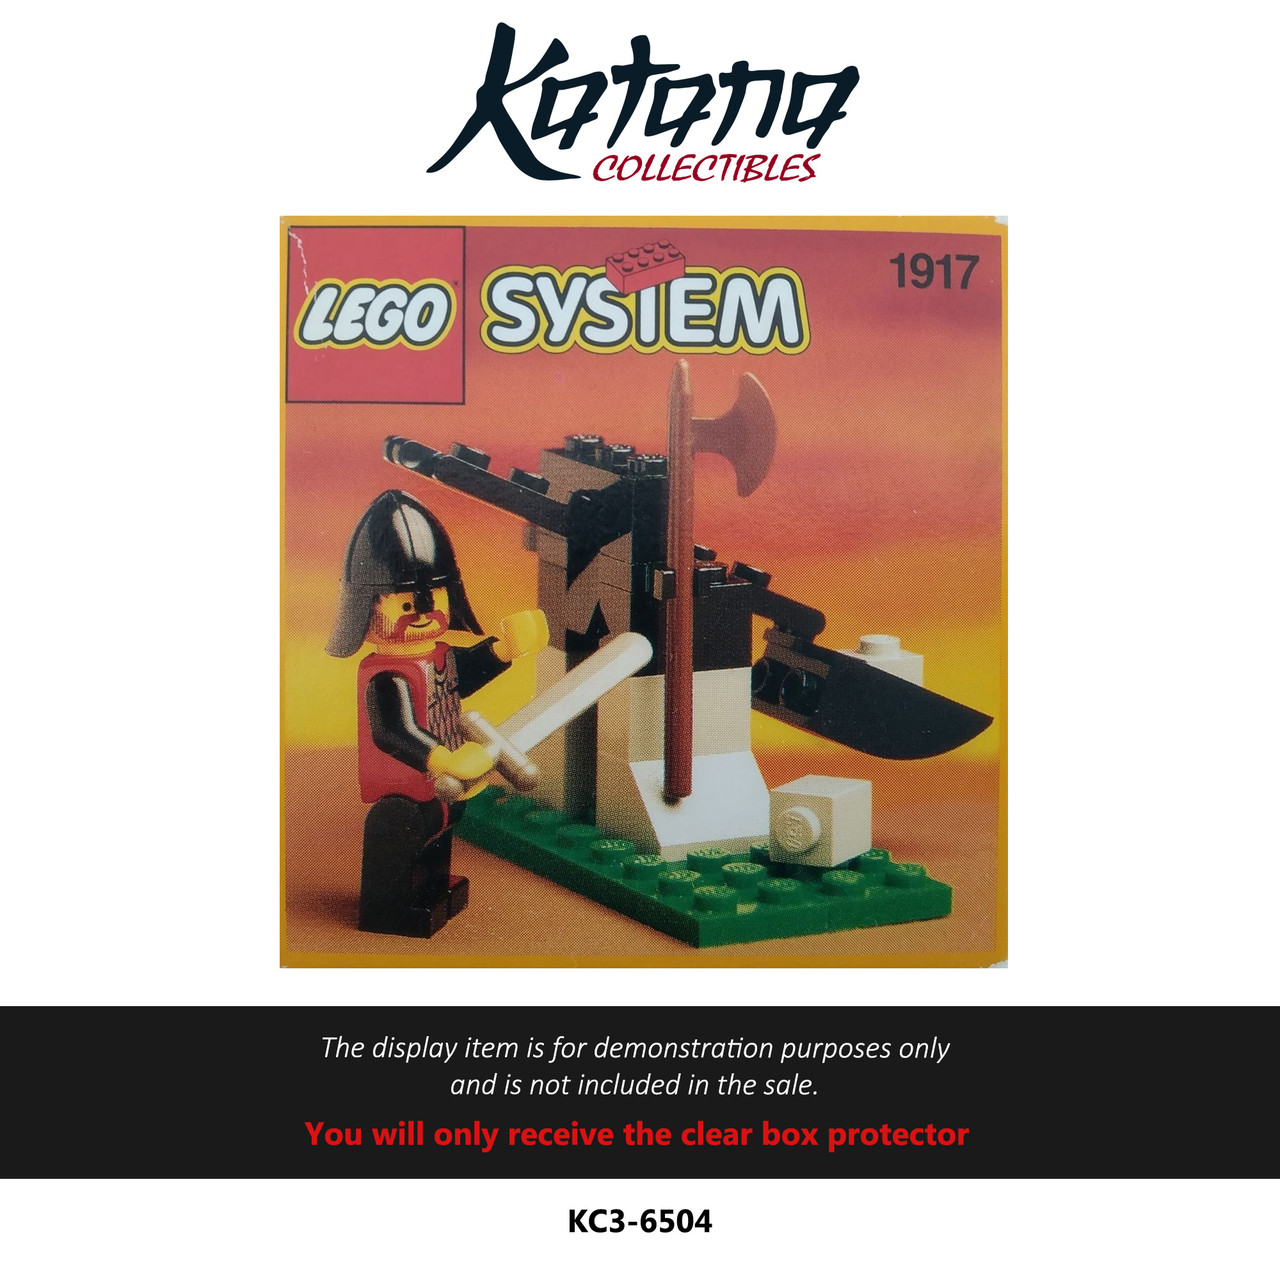 Katana Collectibles Protector For Lego 1917 King's Catapault